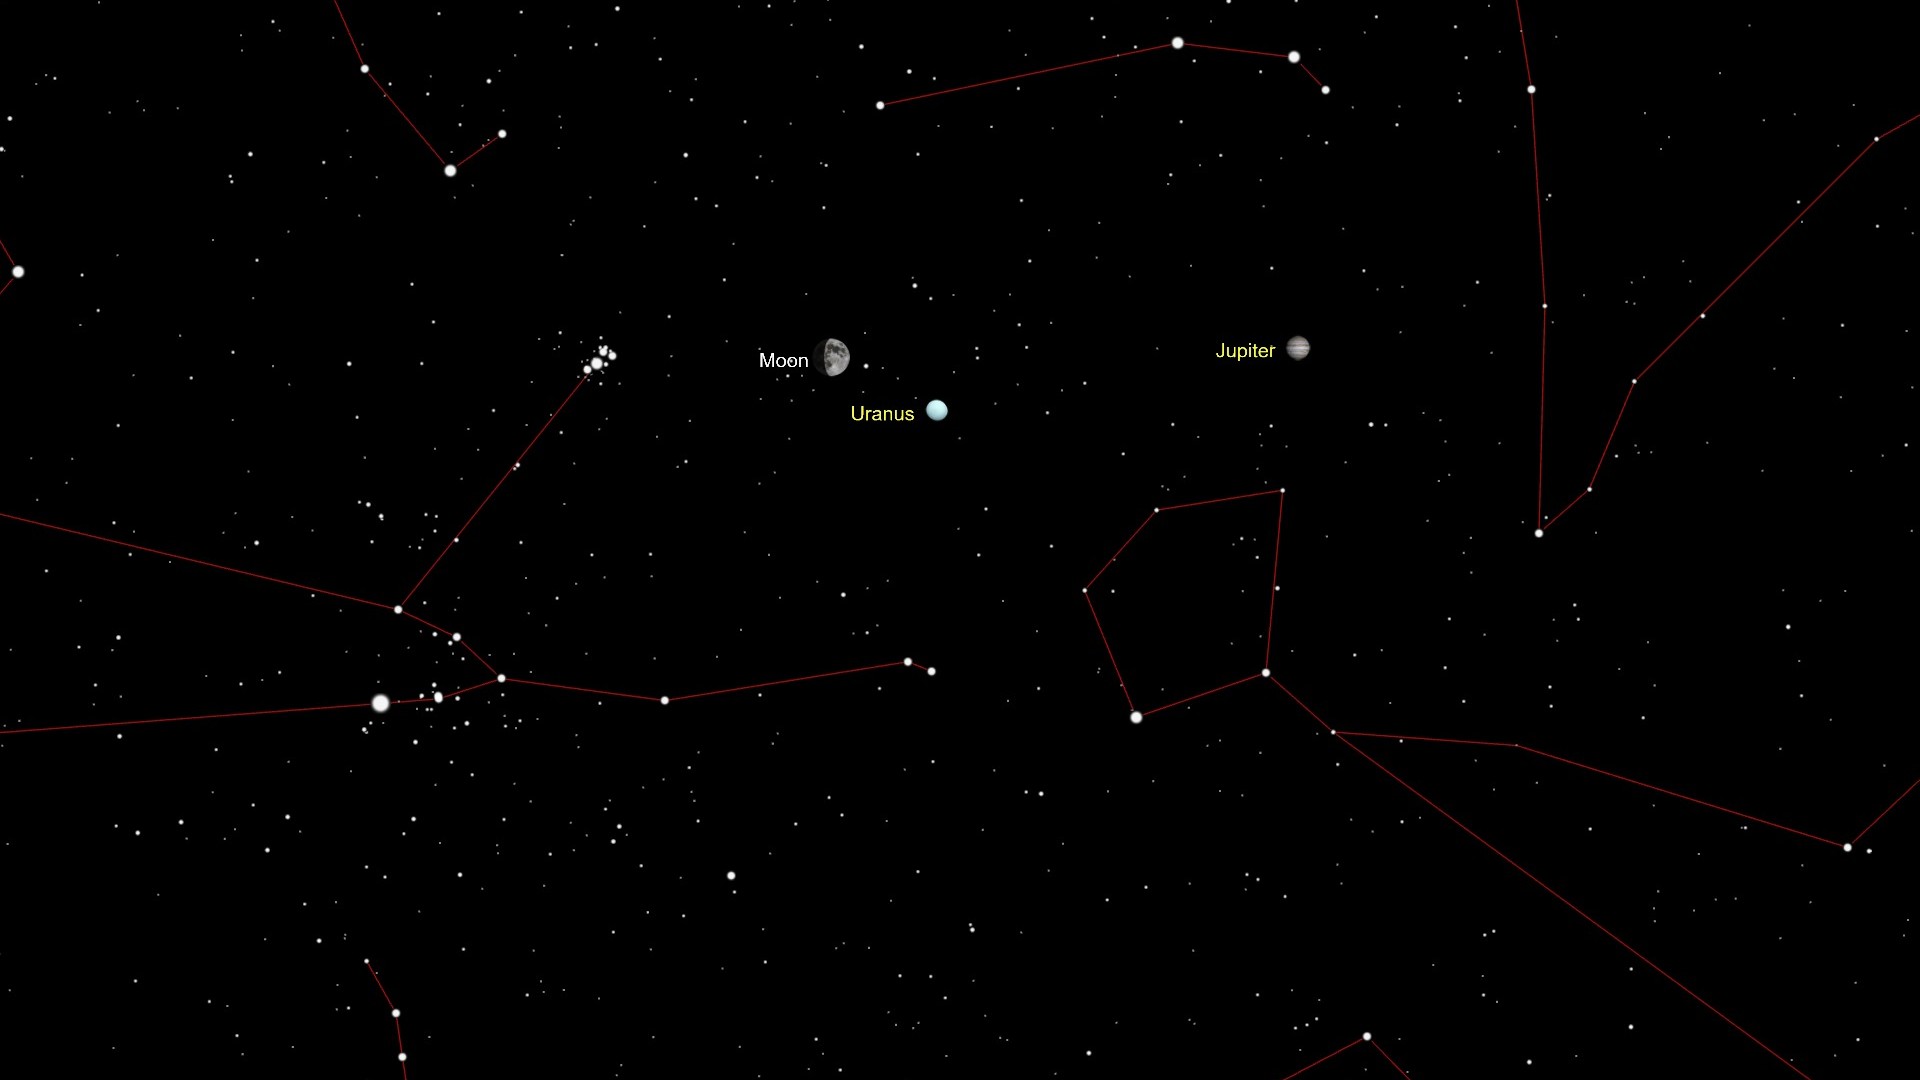 an illustration of the sky showing the moon, uranus and jupiter among stars